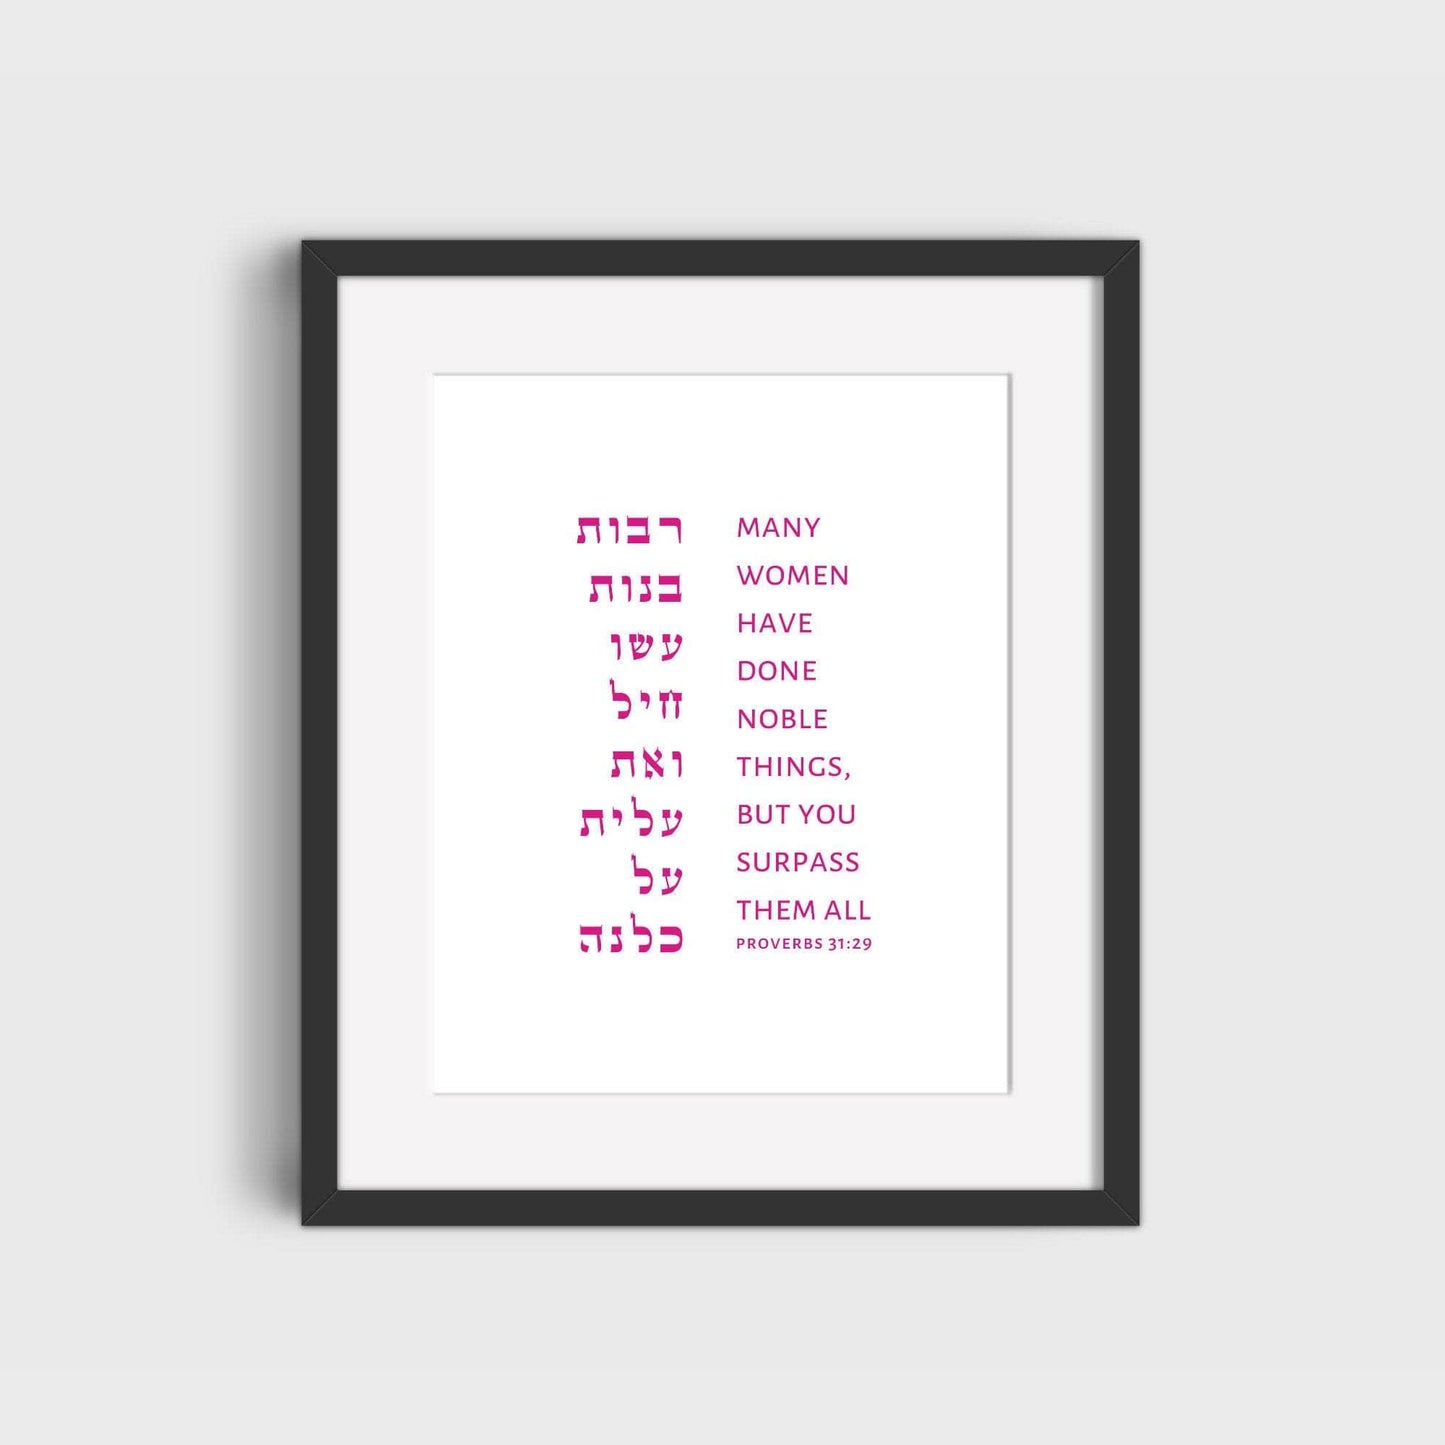 The Verse Proverbs 31:29 Proverbs 31:29 | Woman of Valor Art Print | Jewish Gifts for your Wife